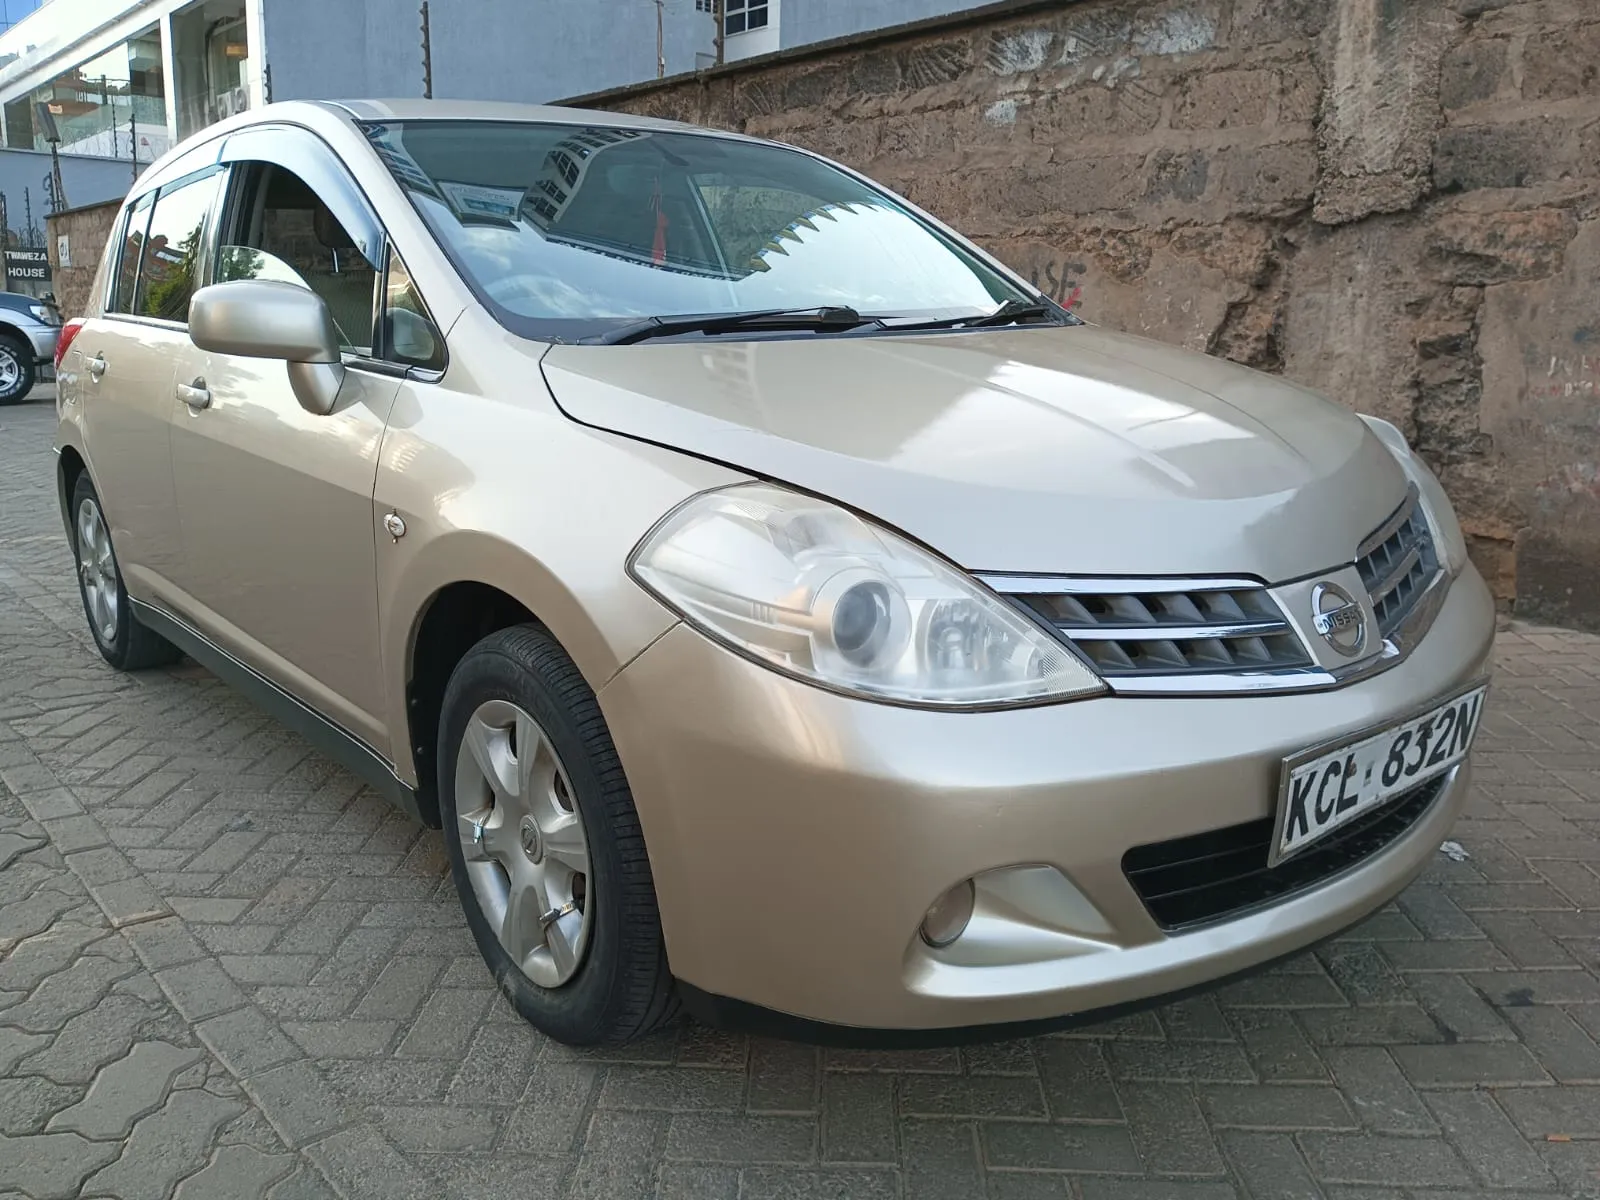 Cars Cars For Sale/Vehicles-Nissan Tiida Cleanest You ONLY Pay 30% DEPOSIT Trade in OK WOW